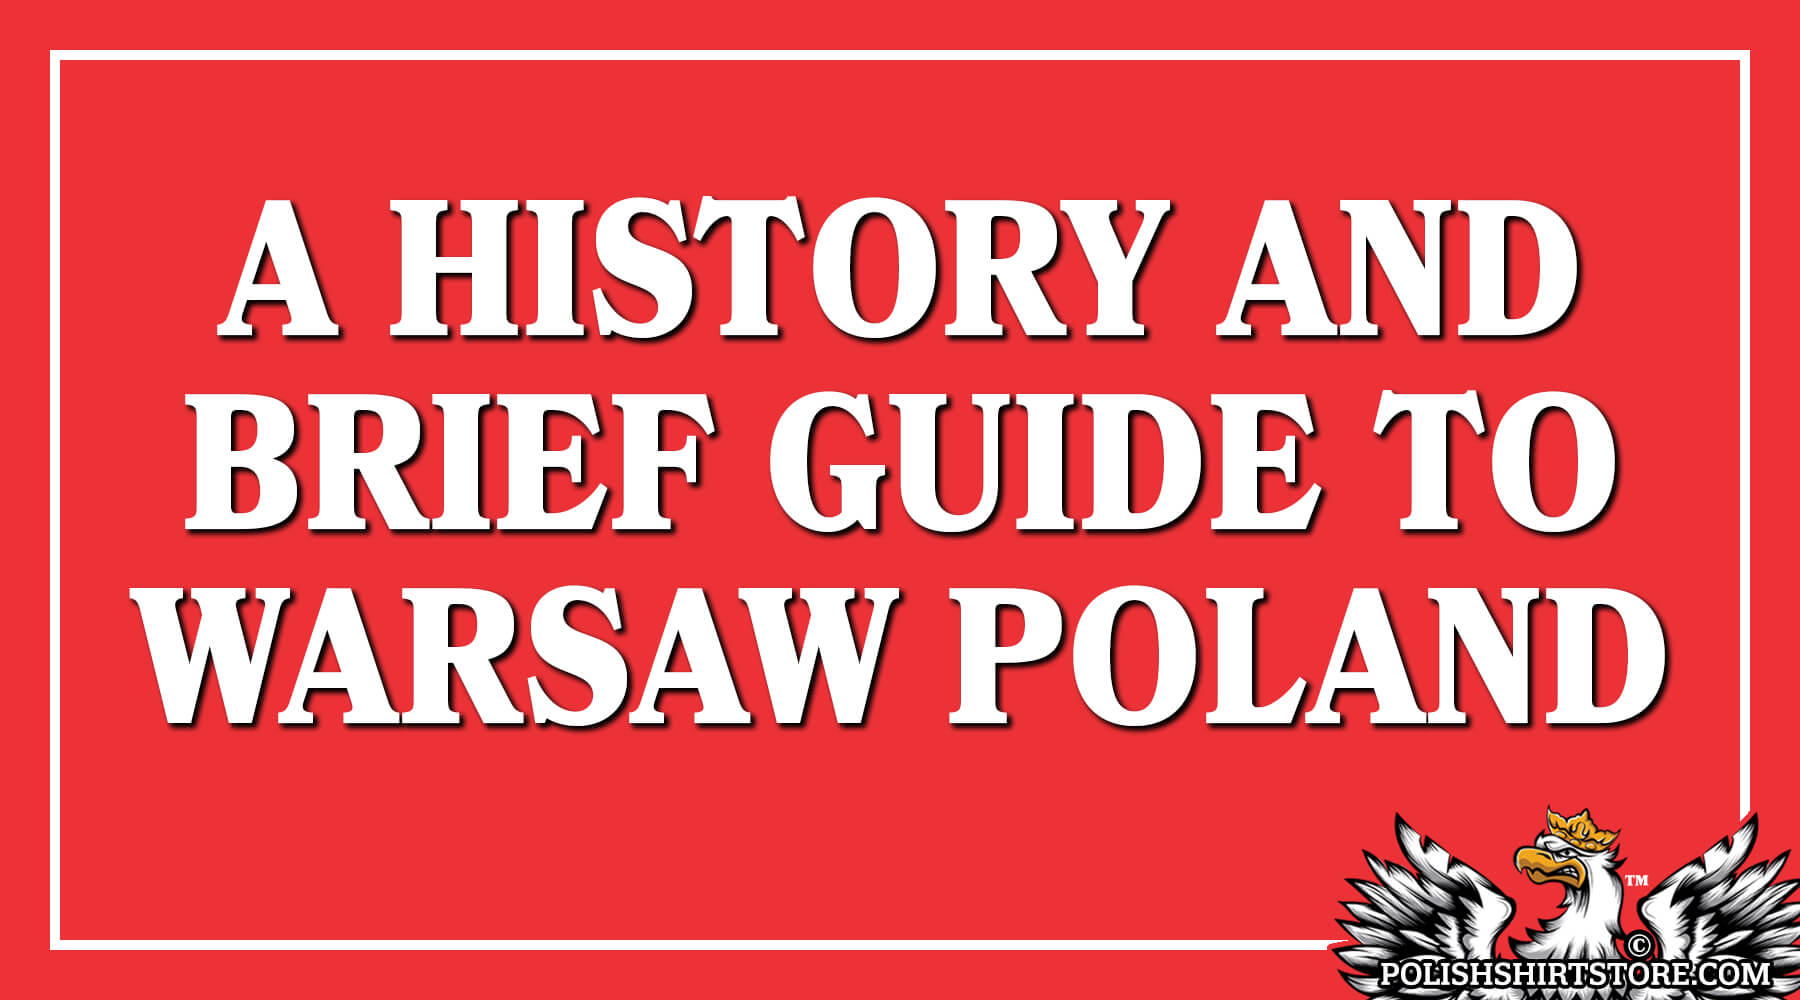 A History And Brief Guide To Warsaw Poland